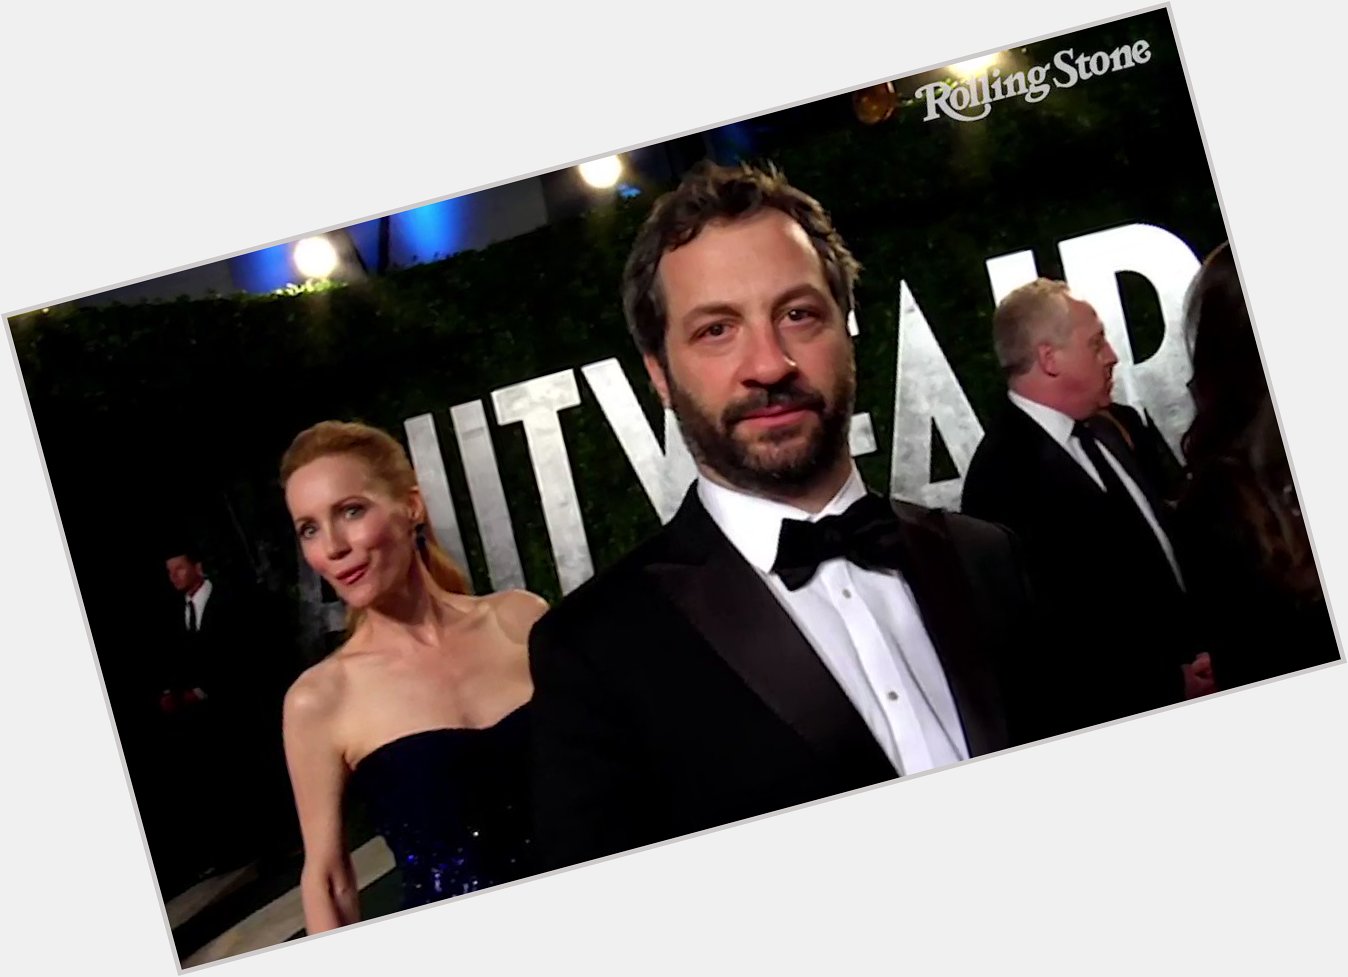 RollingStone: Happy birthday Judd Apatow! Check out our recent Q&A with the director  